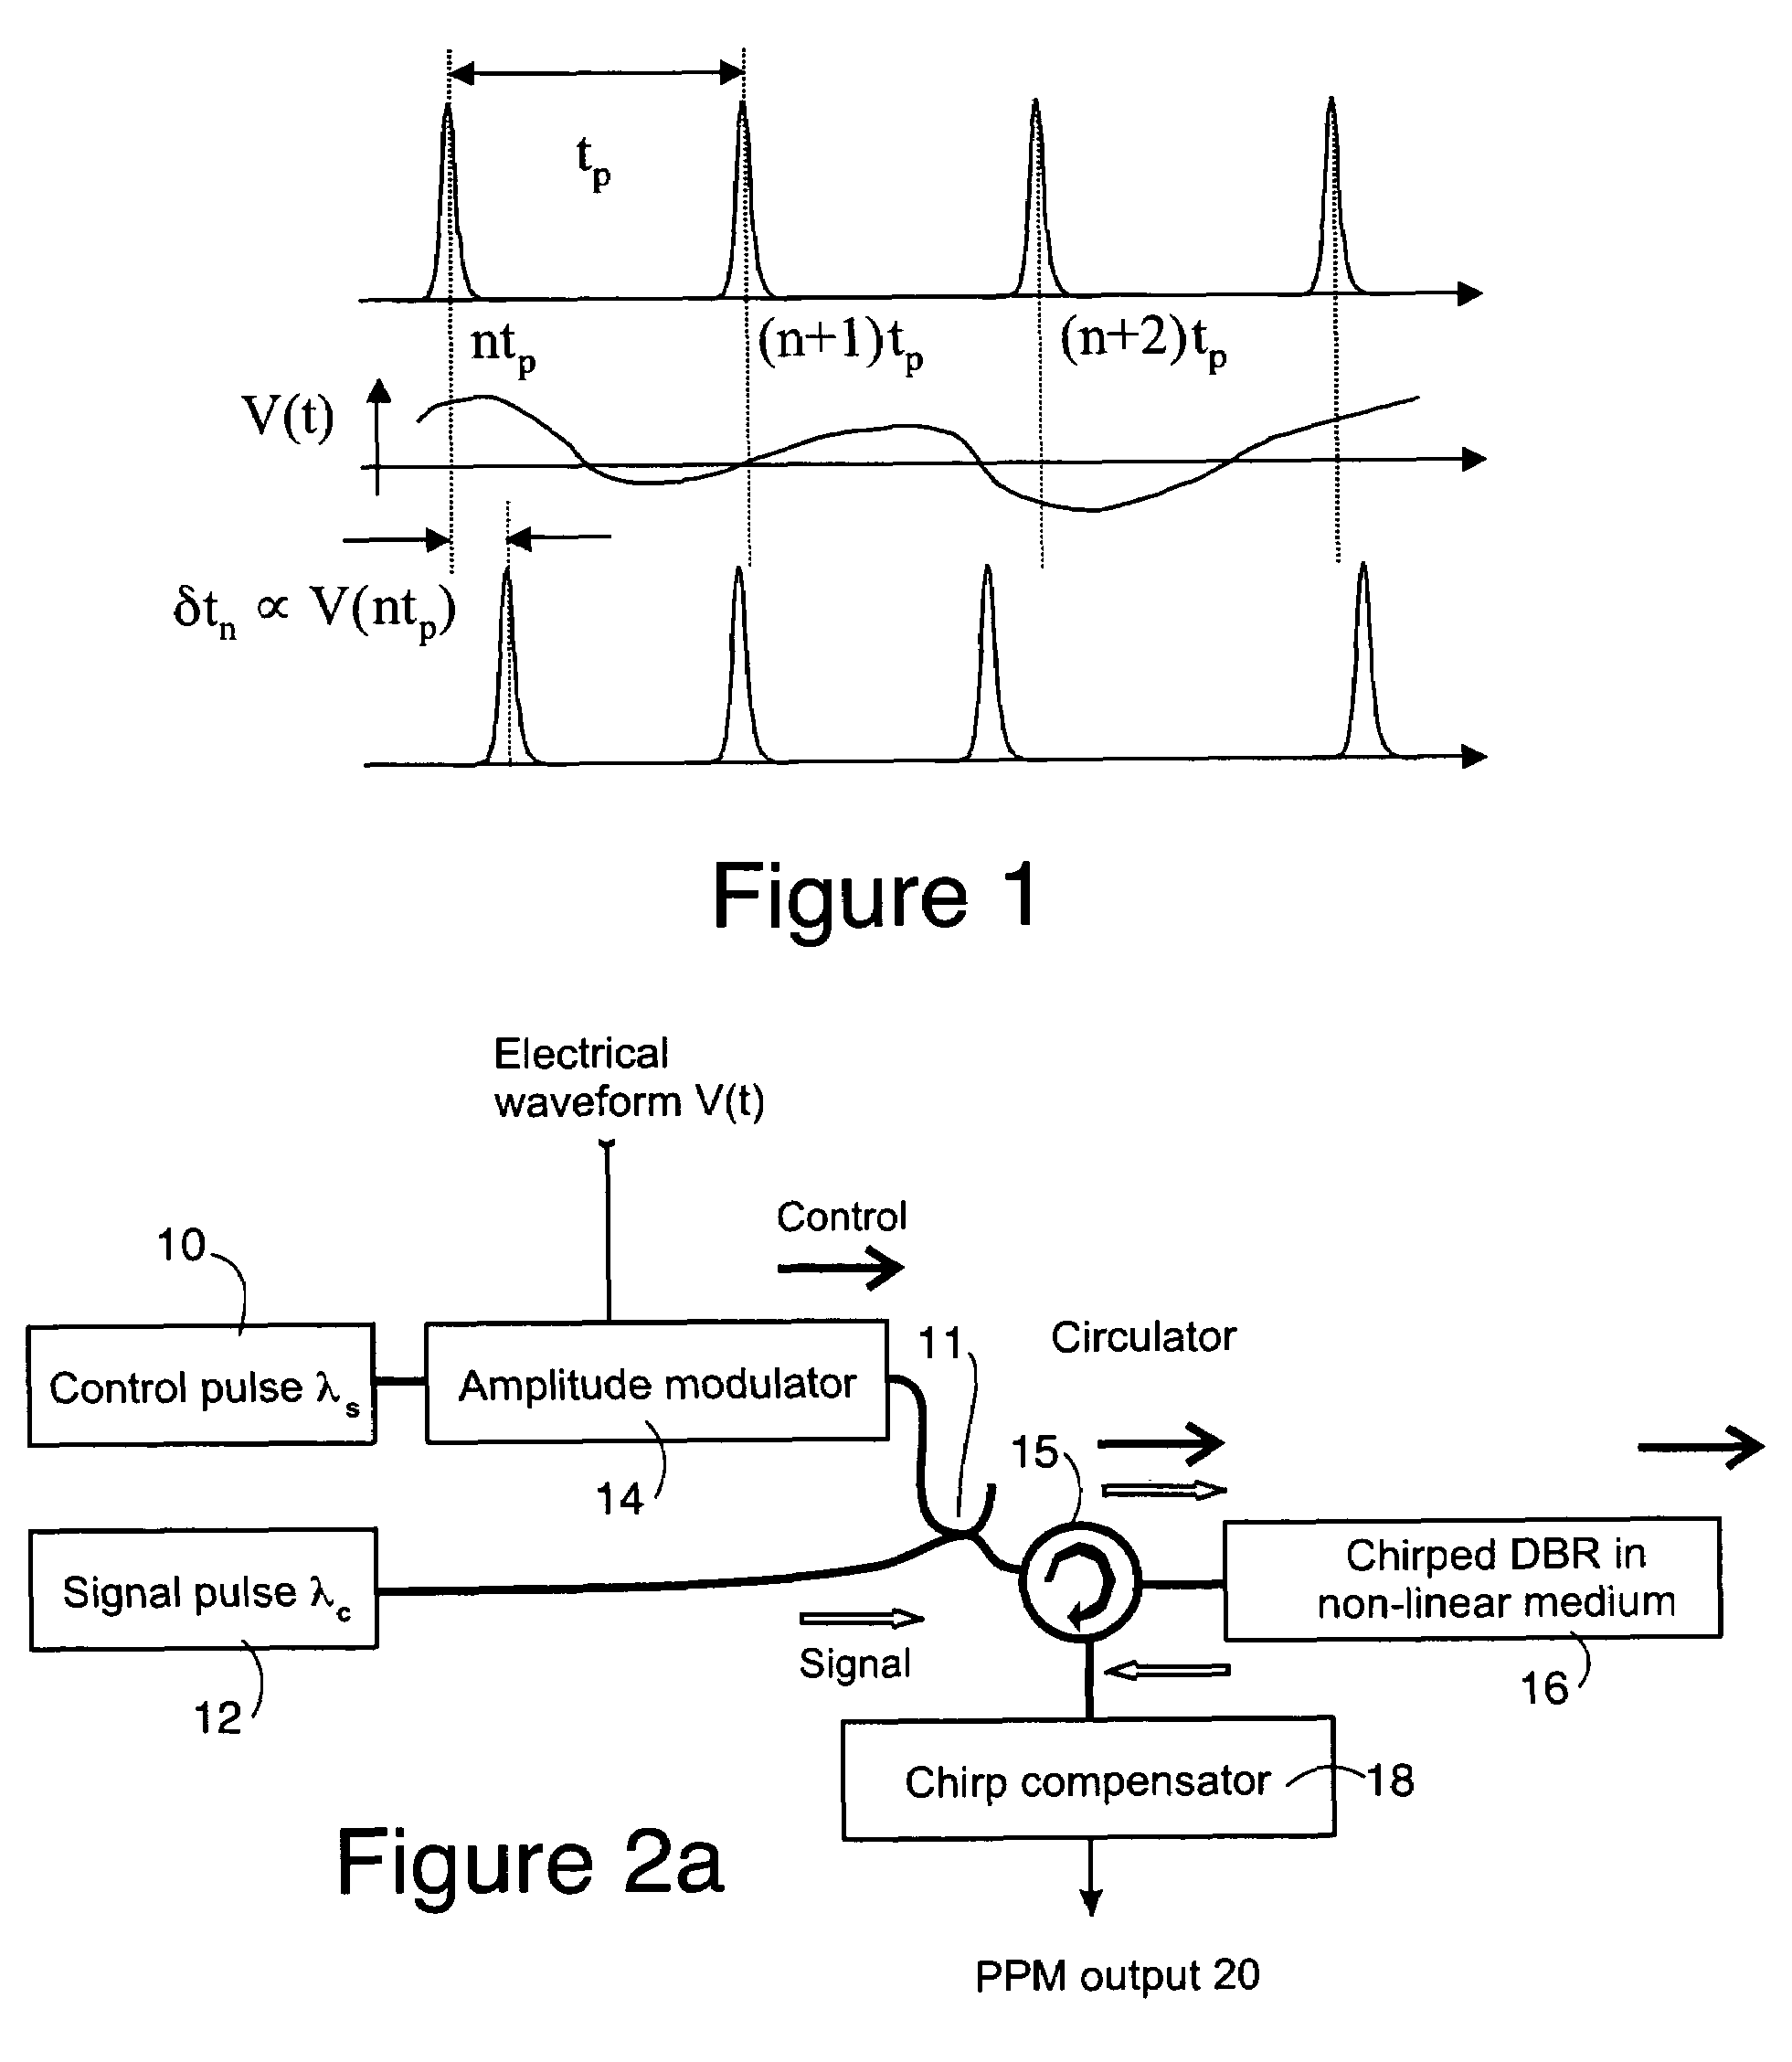 All-optical delay generator for PPM communication systems based on a non-linear waveguide with a chirped DBR